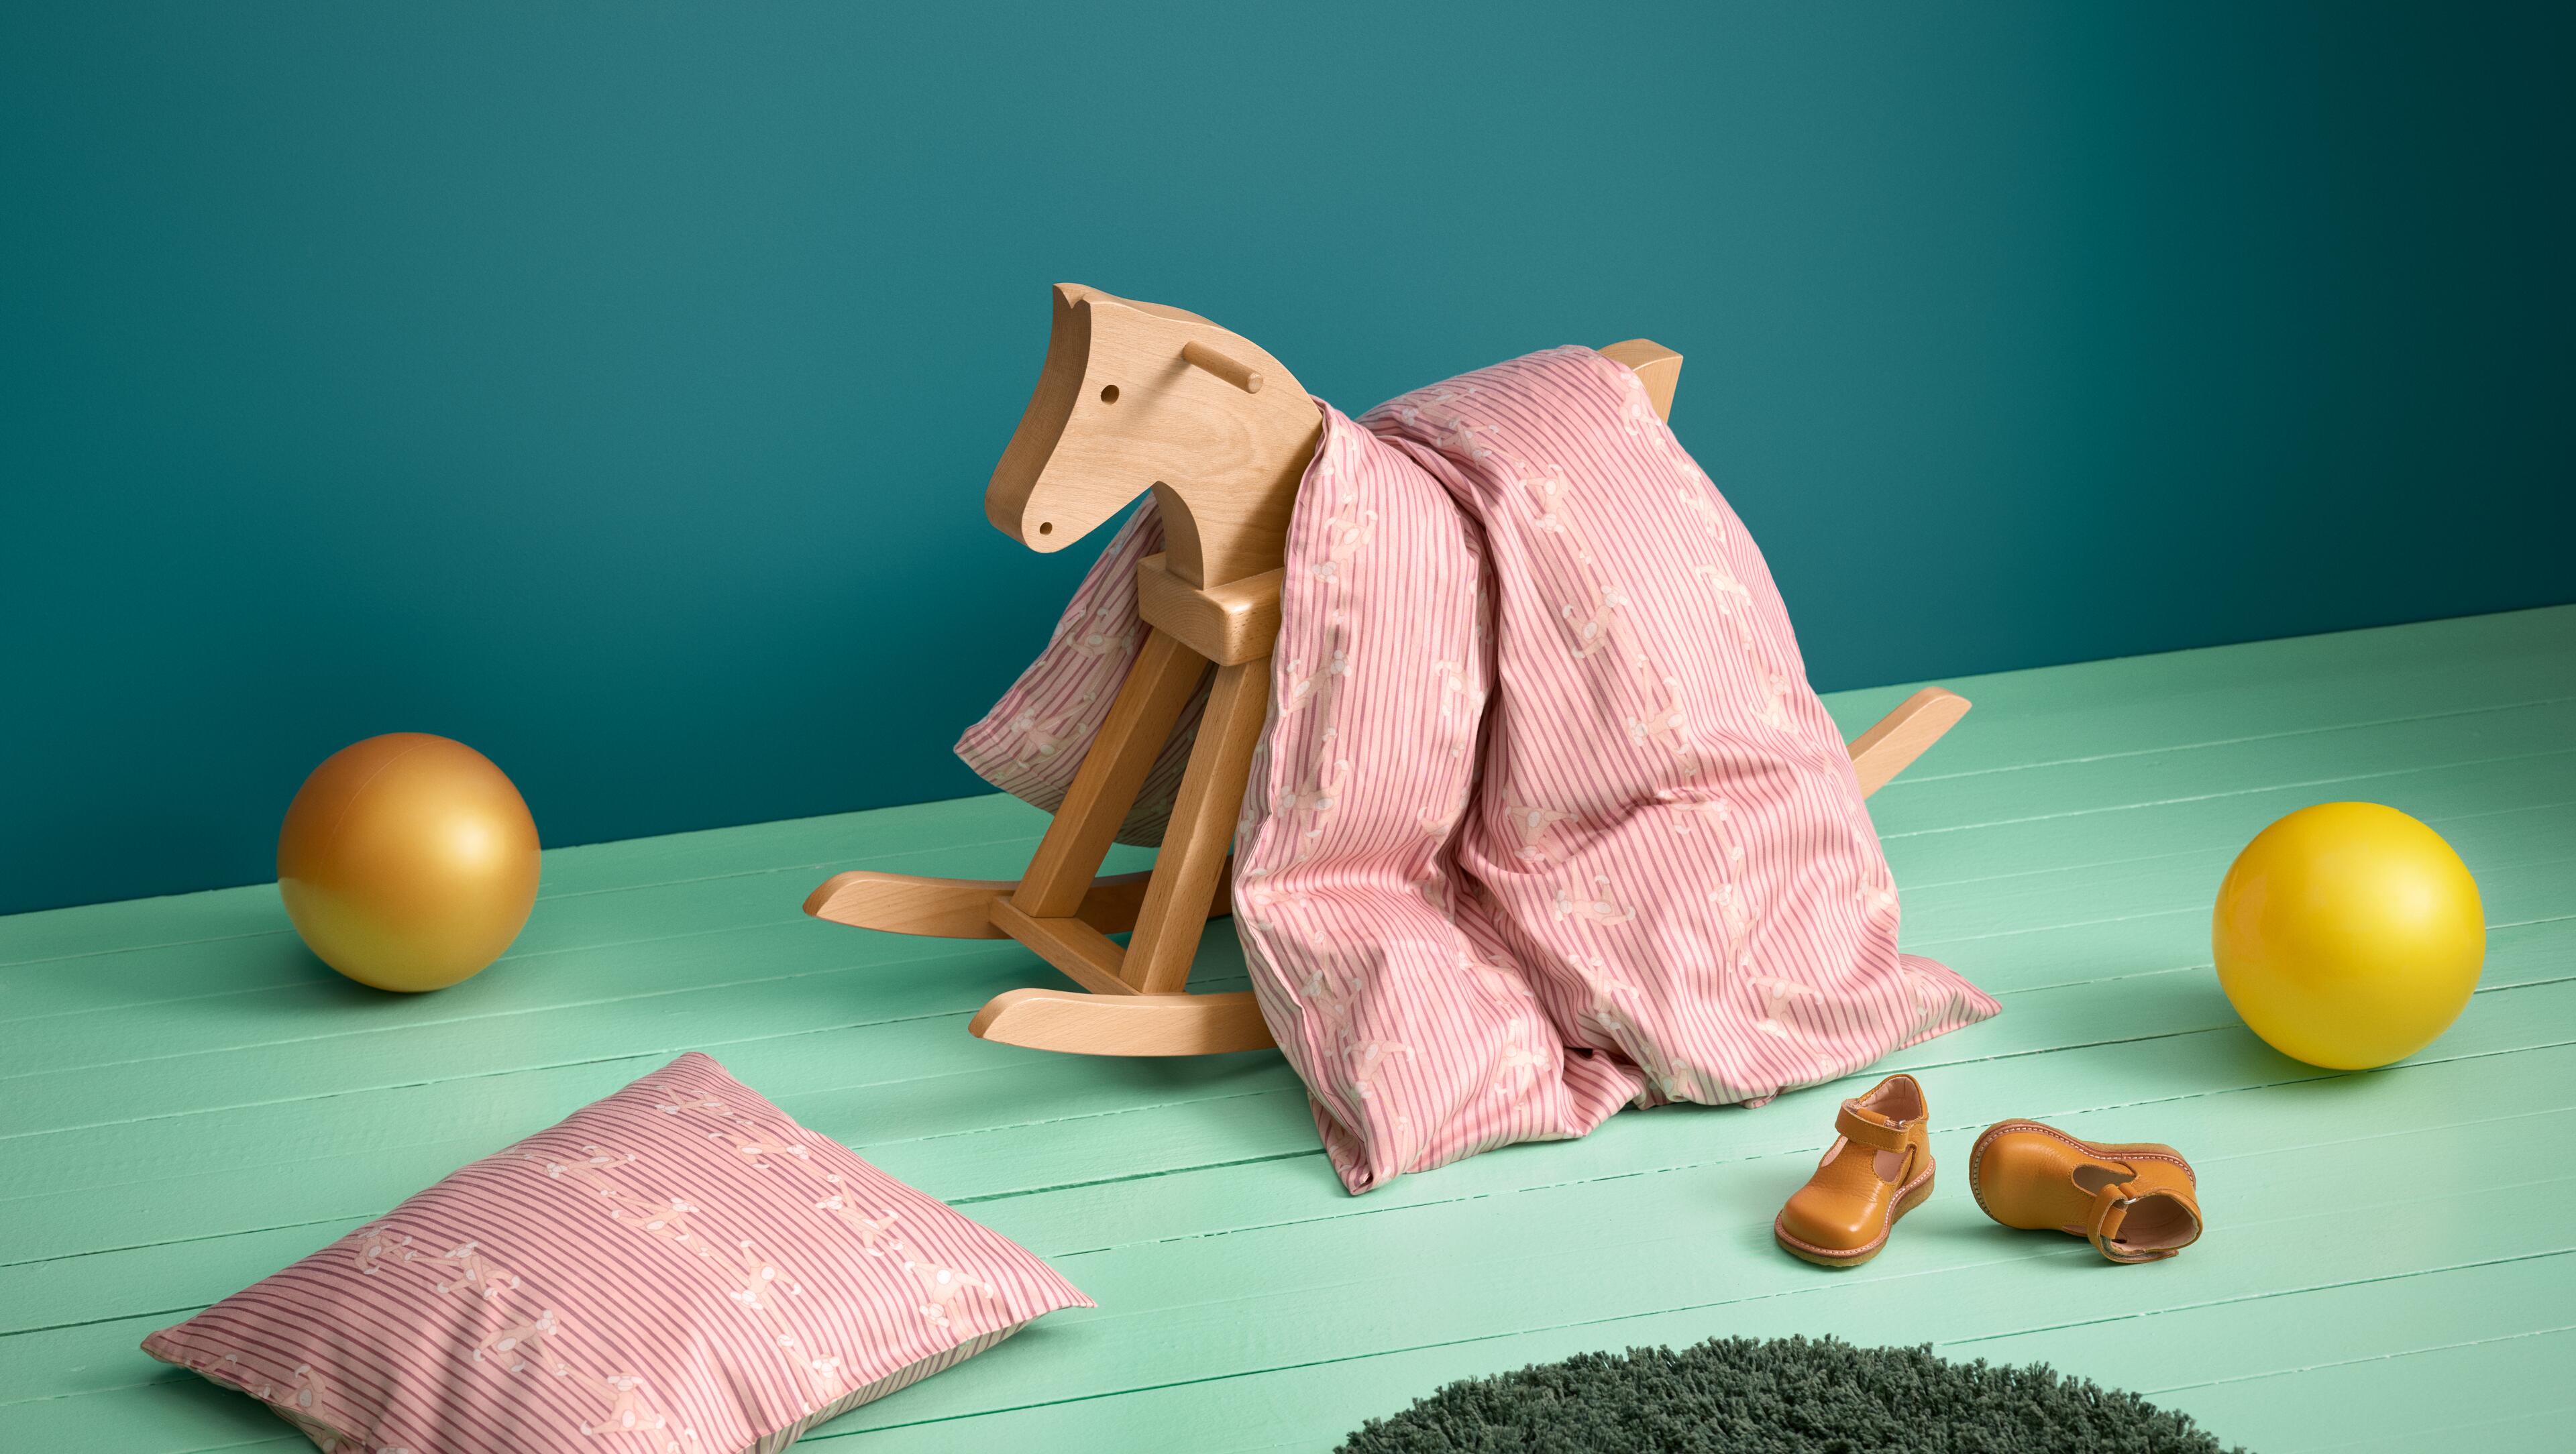 Children's room with rocking horse